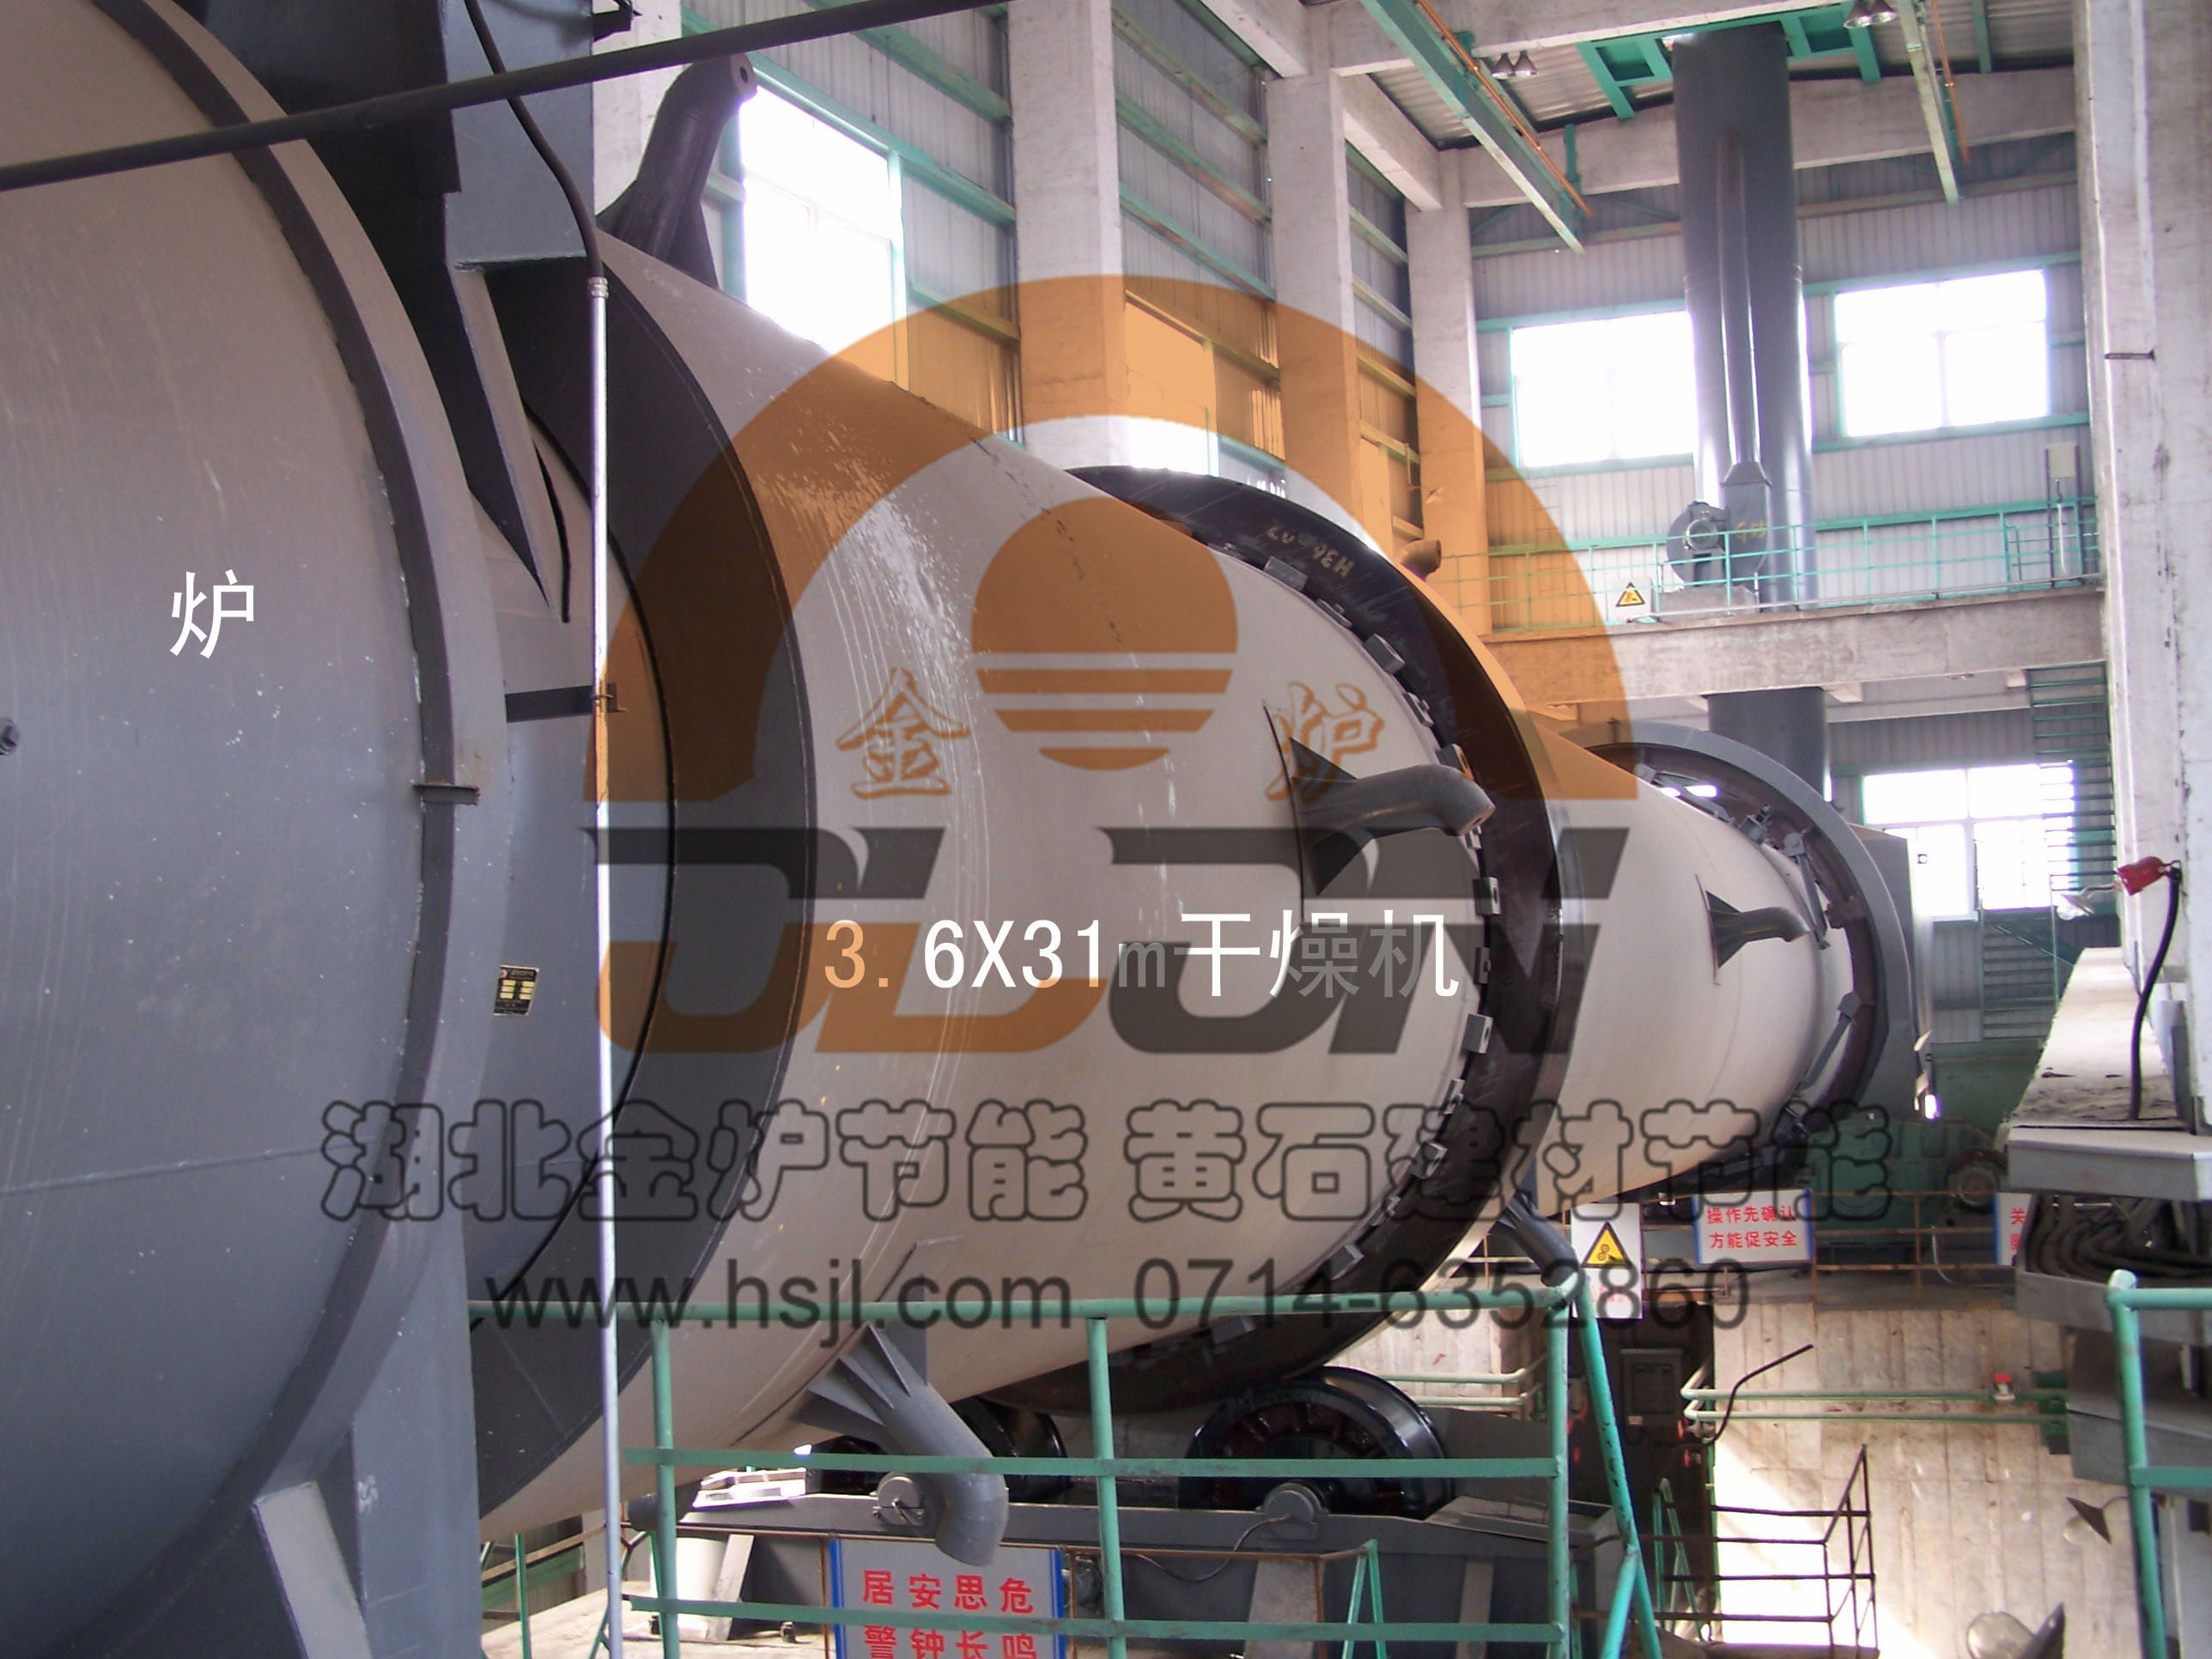 Iron concentrate drying application